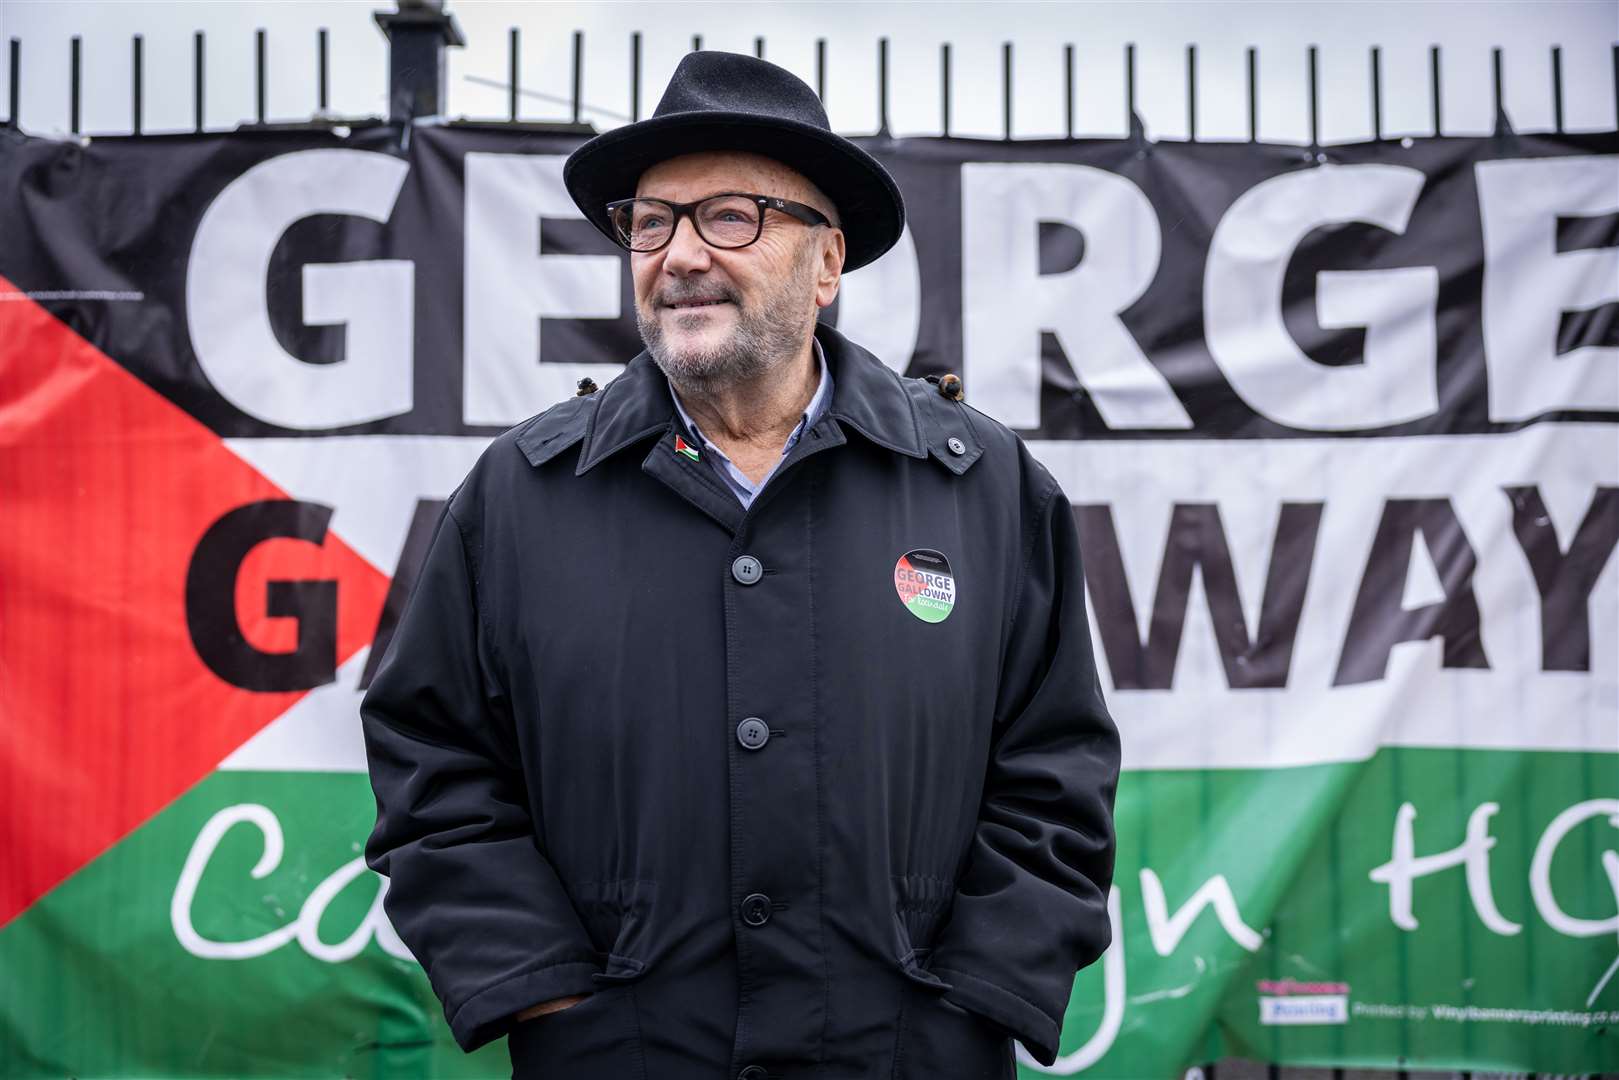 George Galloway has emerged as the favourite to take the Rochdale seat in Thursday’s by-election. (James Speakman/PA)